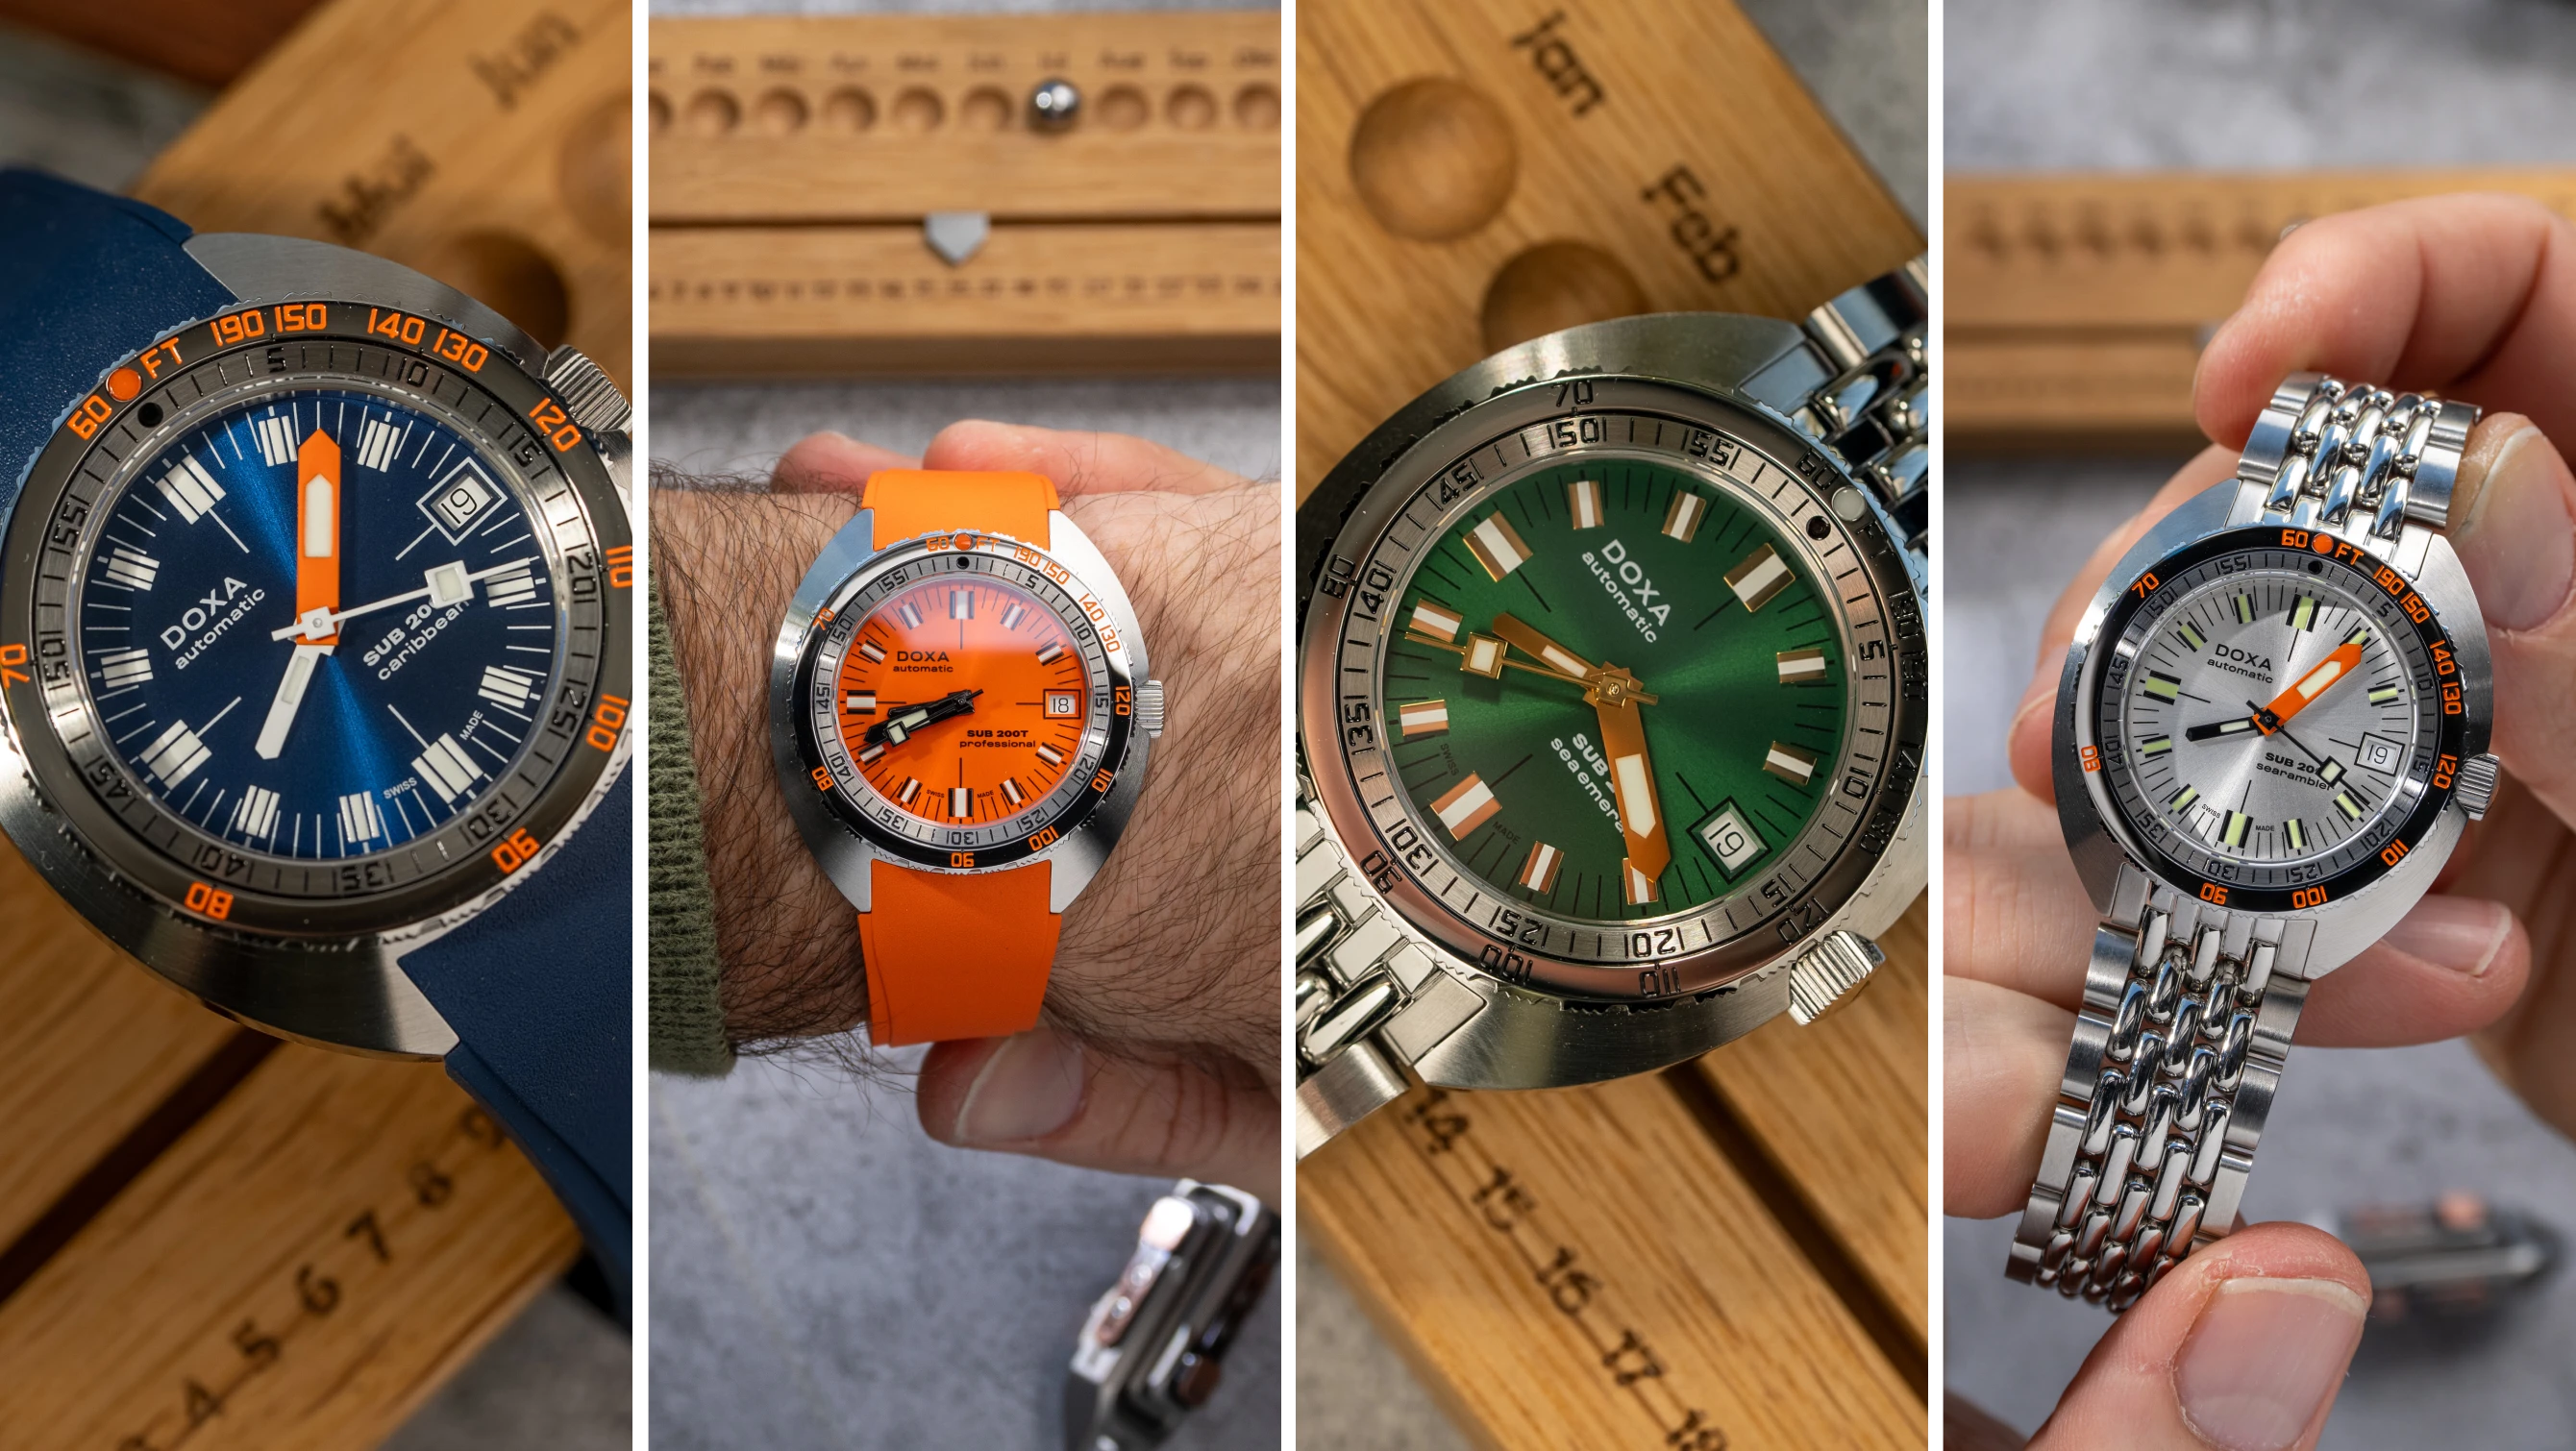 The Doxa SUB 200T is classic Doxa flavour in a smaller and cheaper package